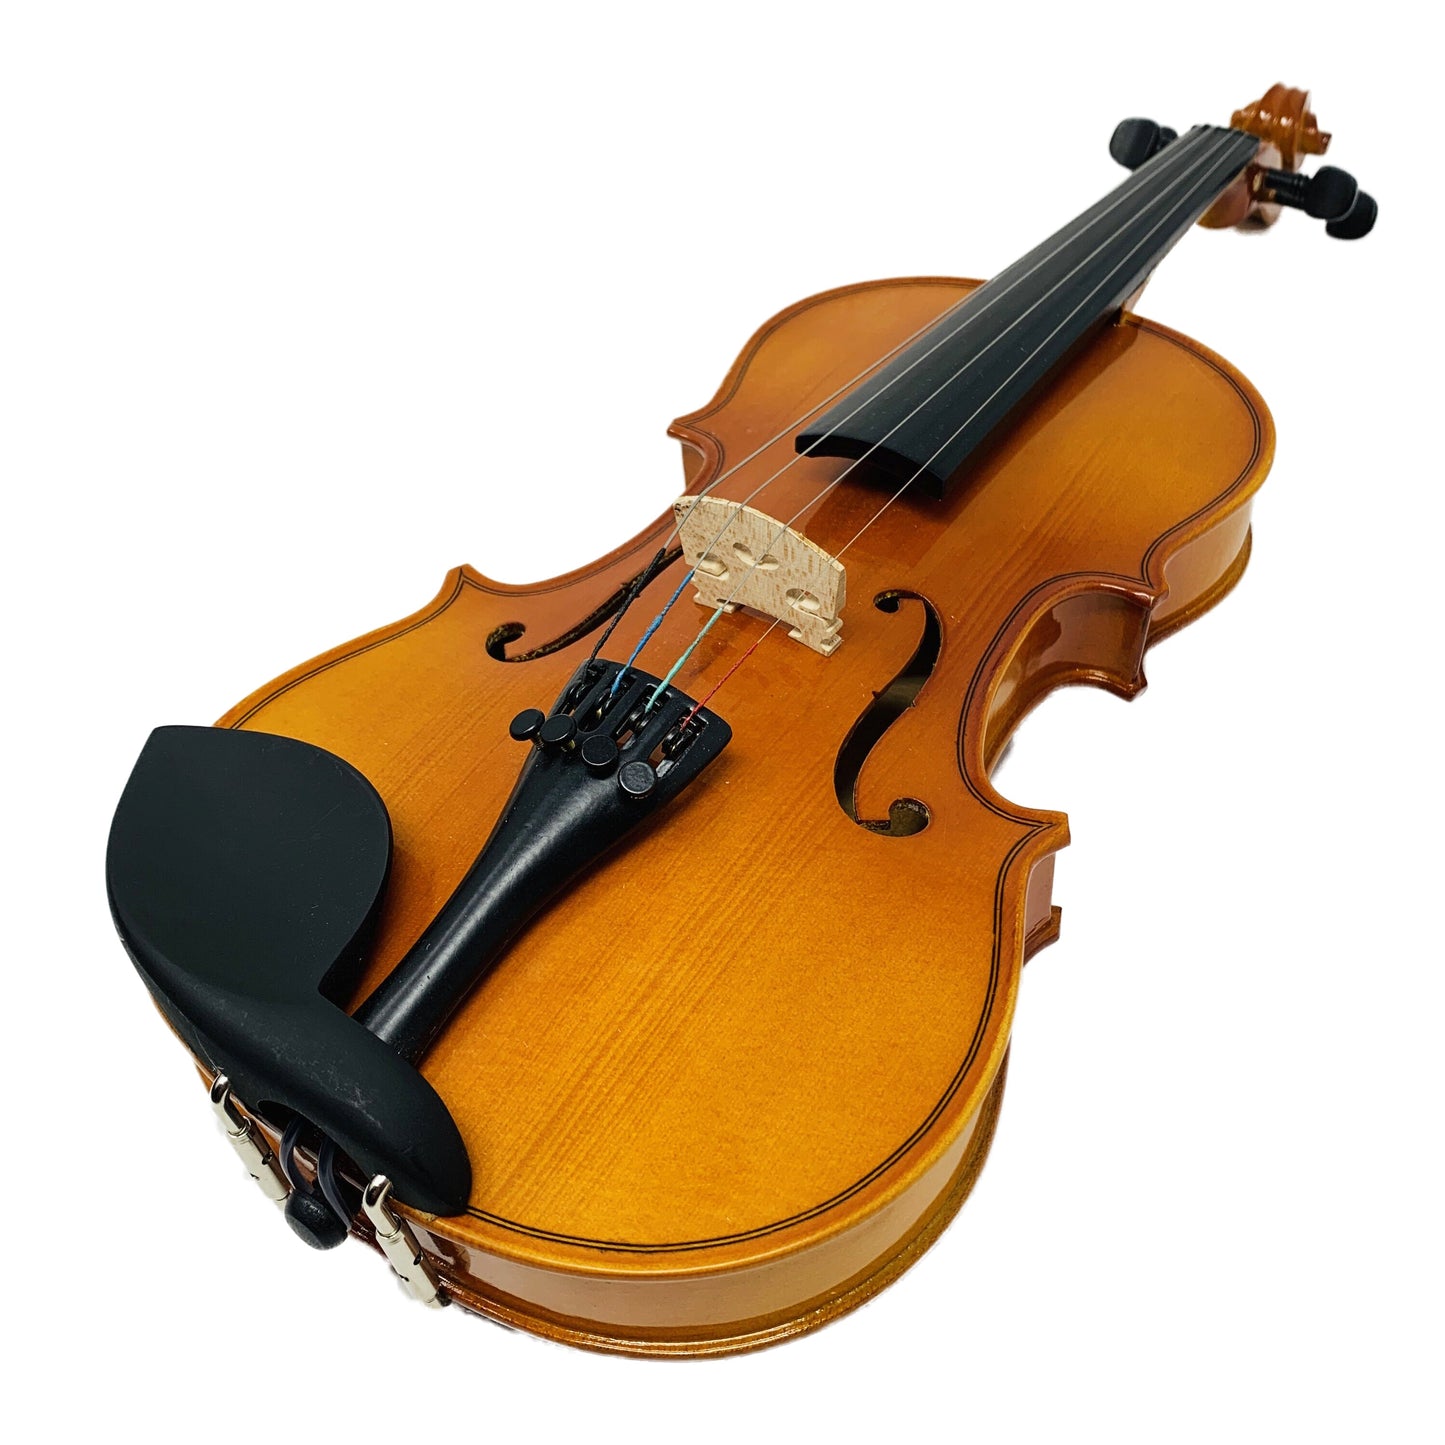 Kalena Spruce Top Violin 1/2 size includes hard case with bow, shoulder rest and rosin